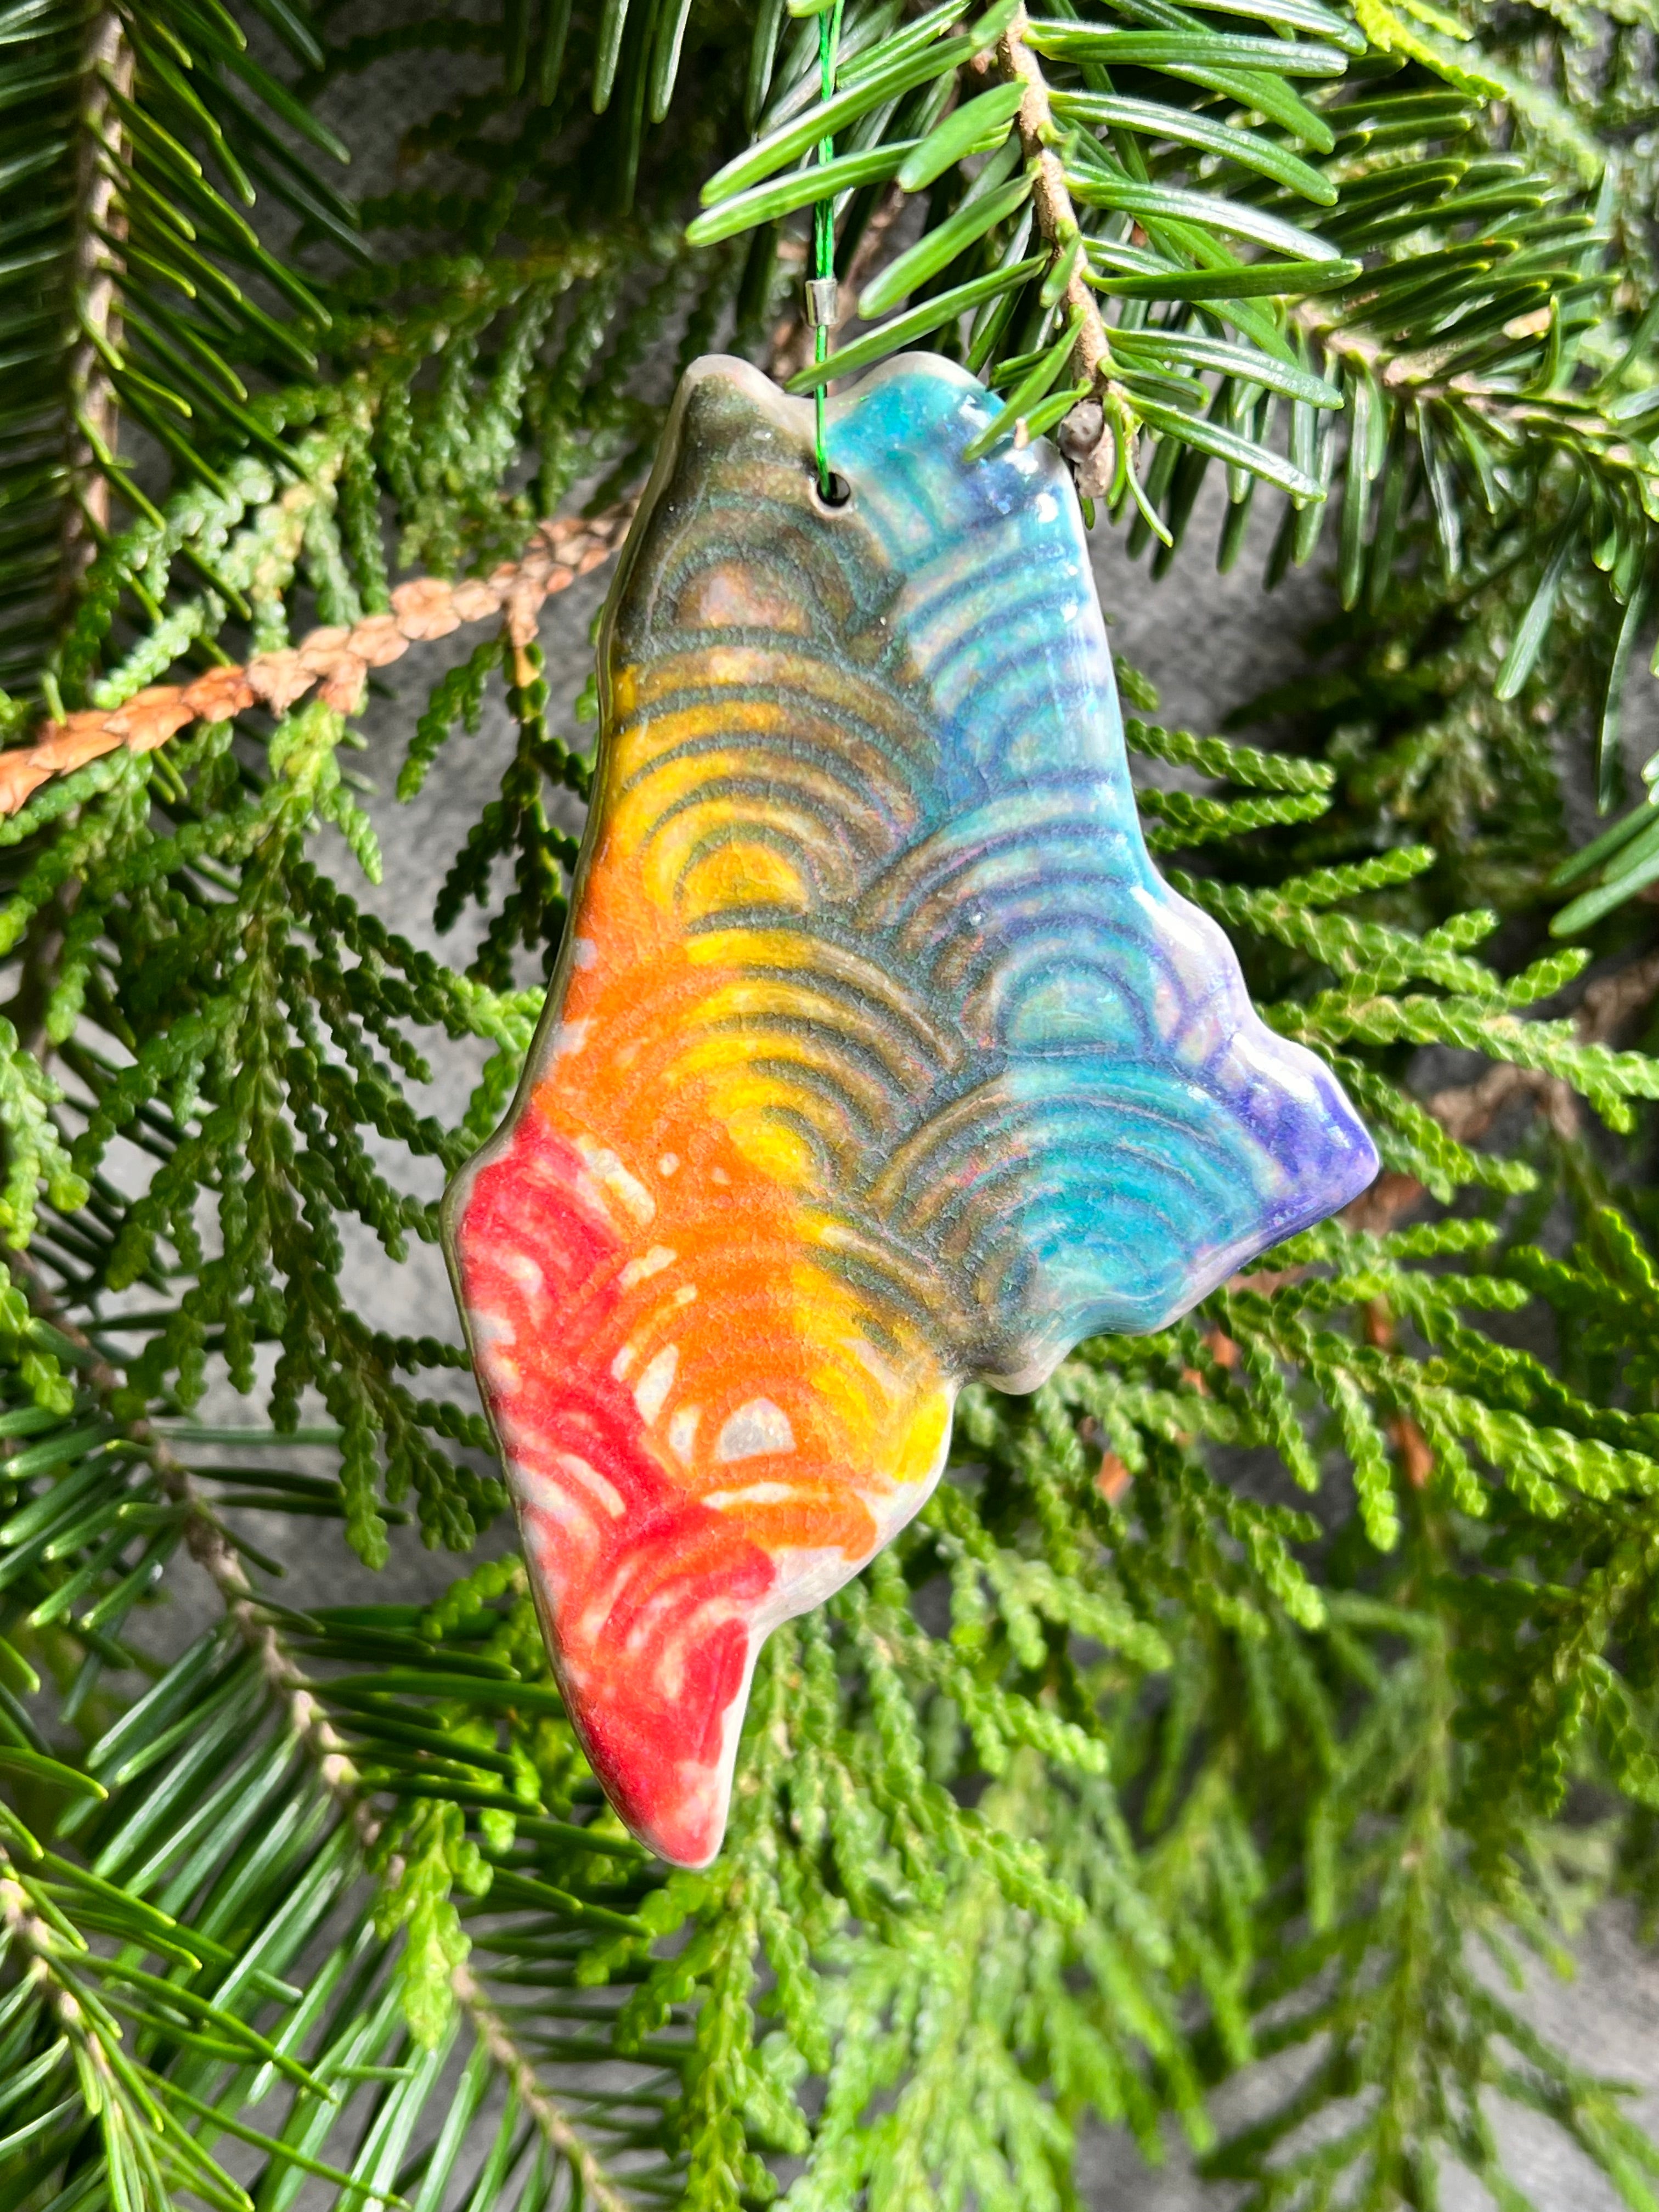 A state of Maine ornament with a rainbow of painted vertical stripes and a rainbow textured surface and a clear crackle glaze hangs in front of cedar and balsam branches.